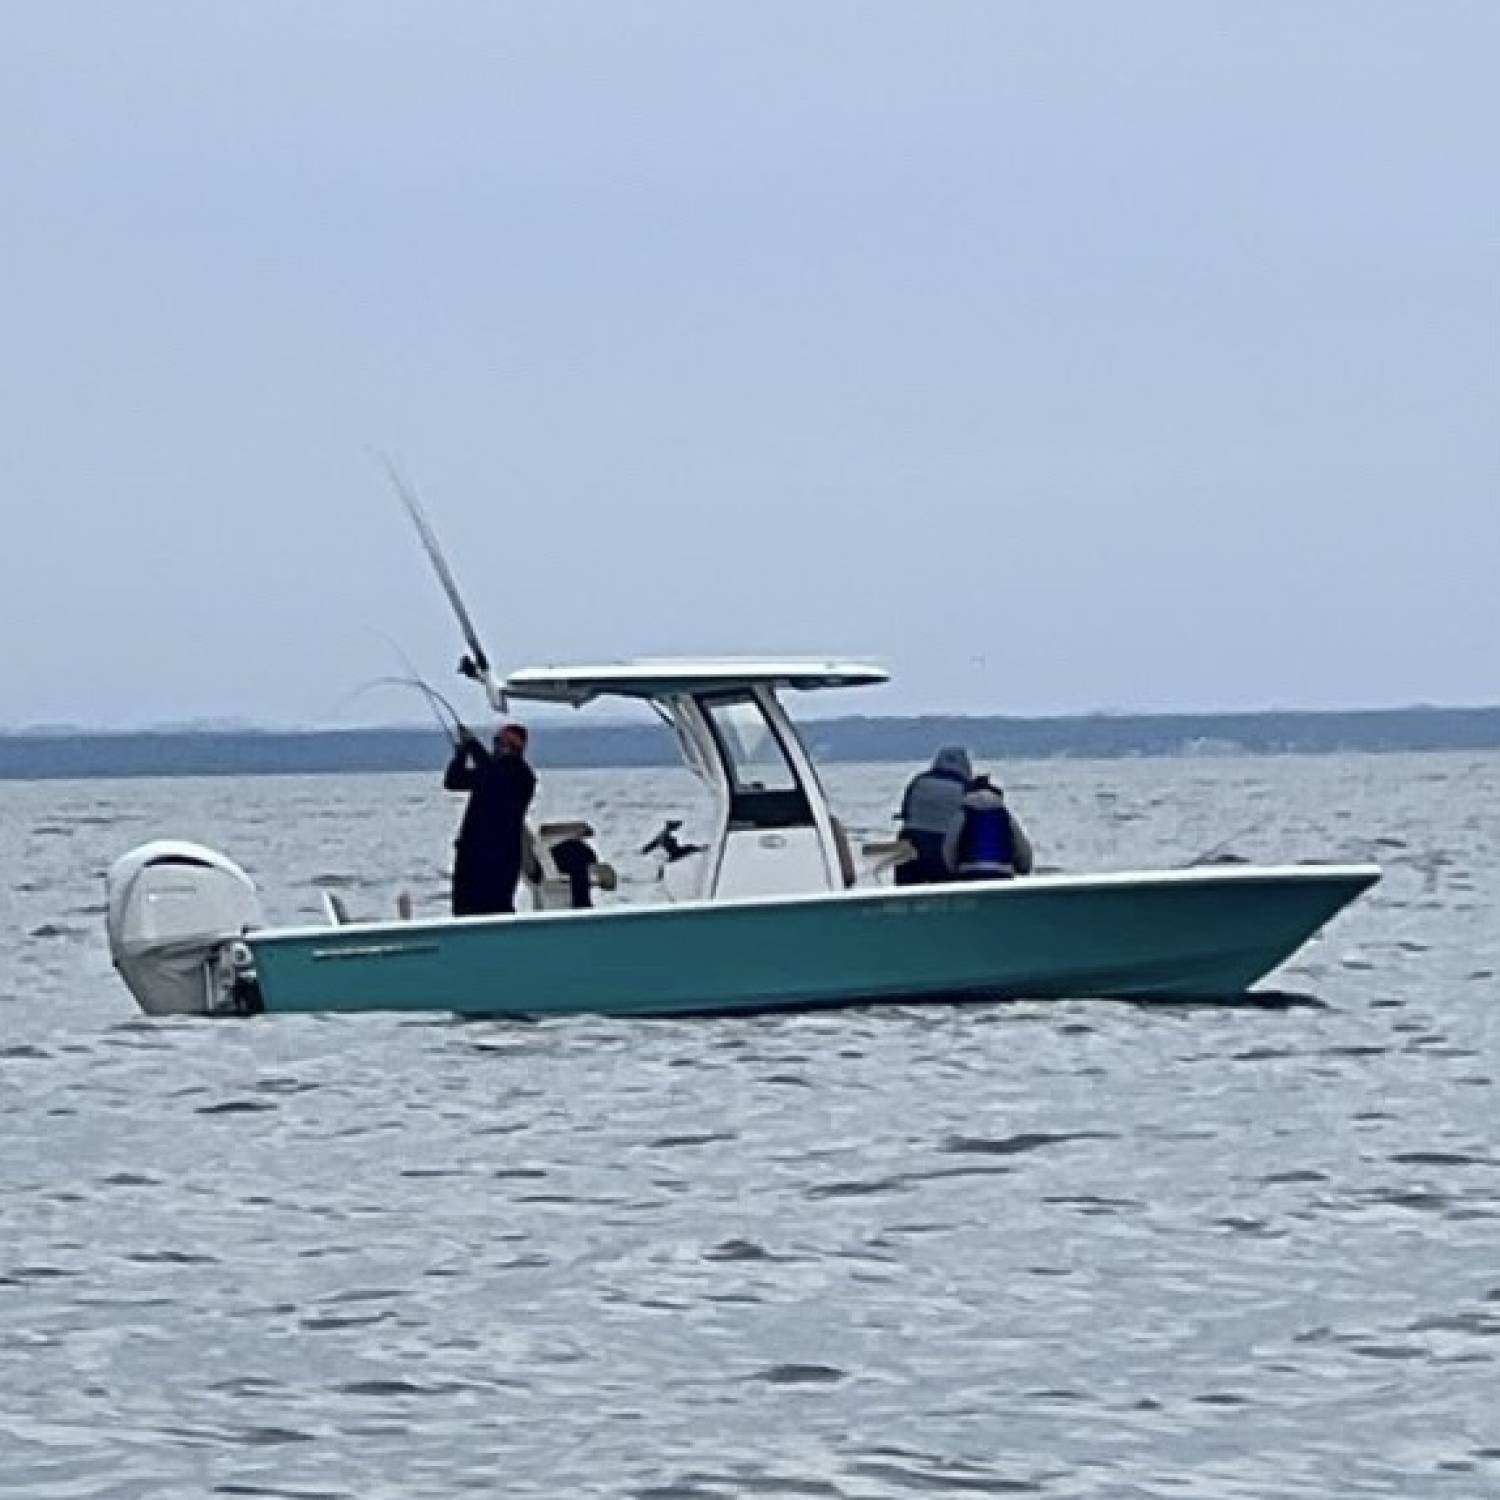 Title: Edwards - On board their Sportsman Masters 247OE Bay Boat - Location: Chesapeake bay. Participating in the Photo Contest #SportsmanApril2024